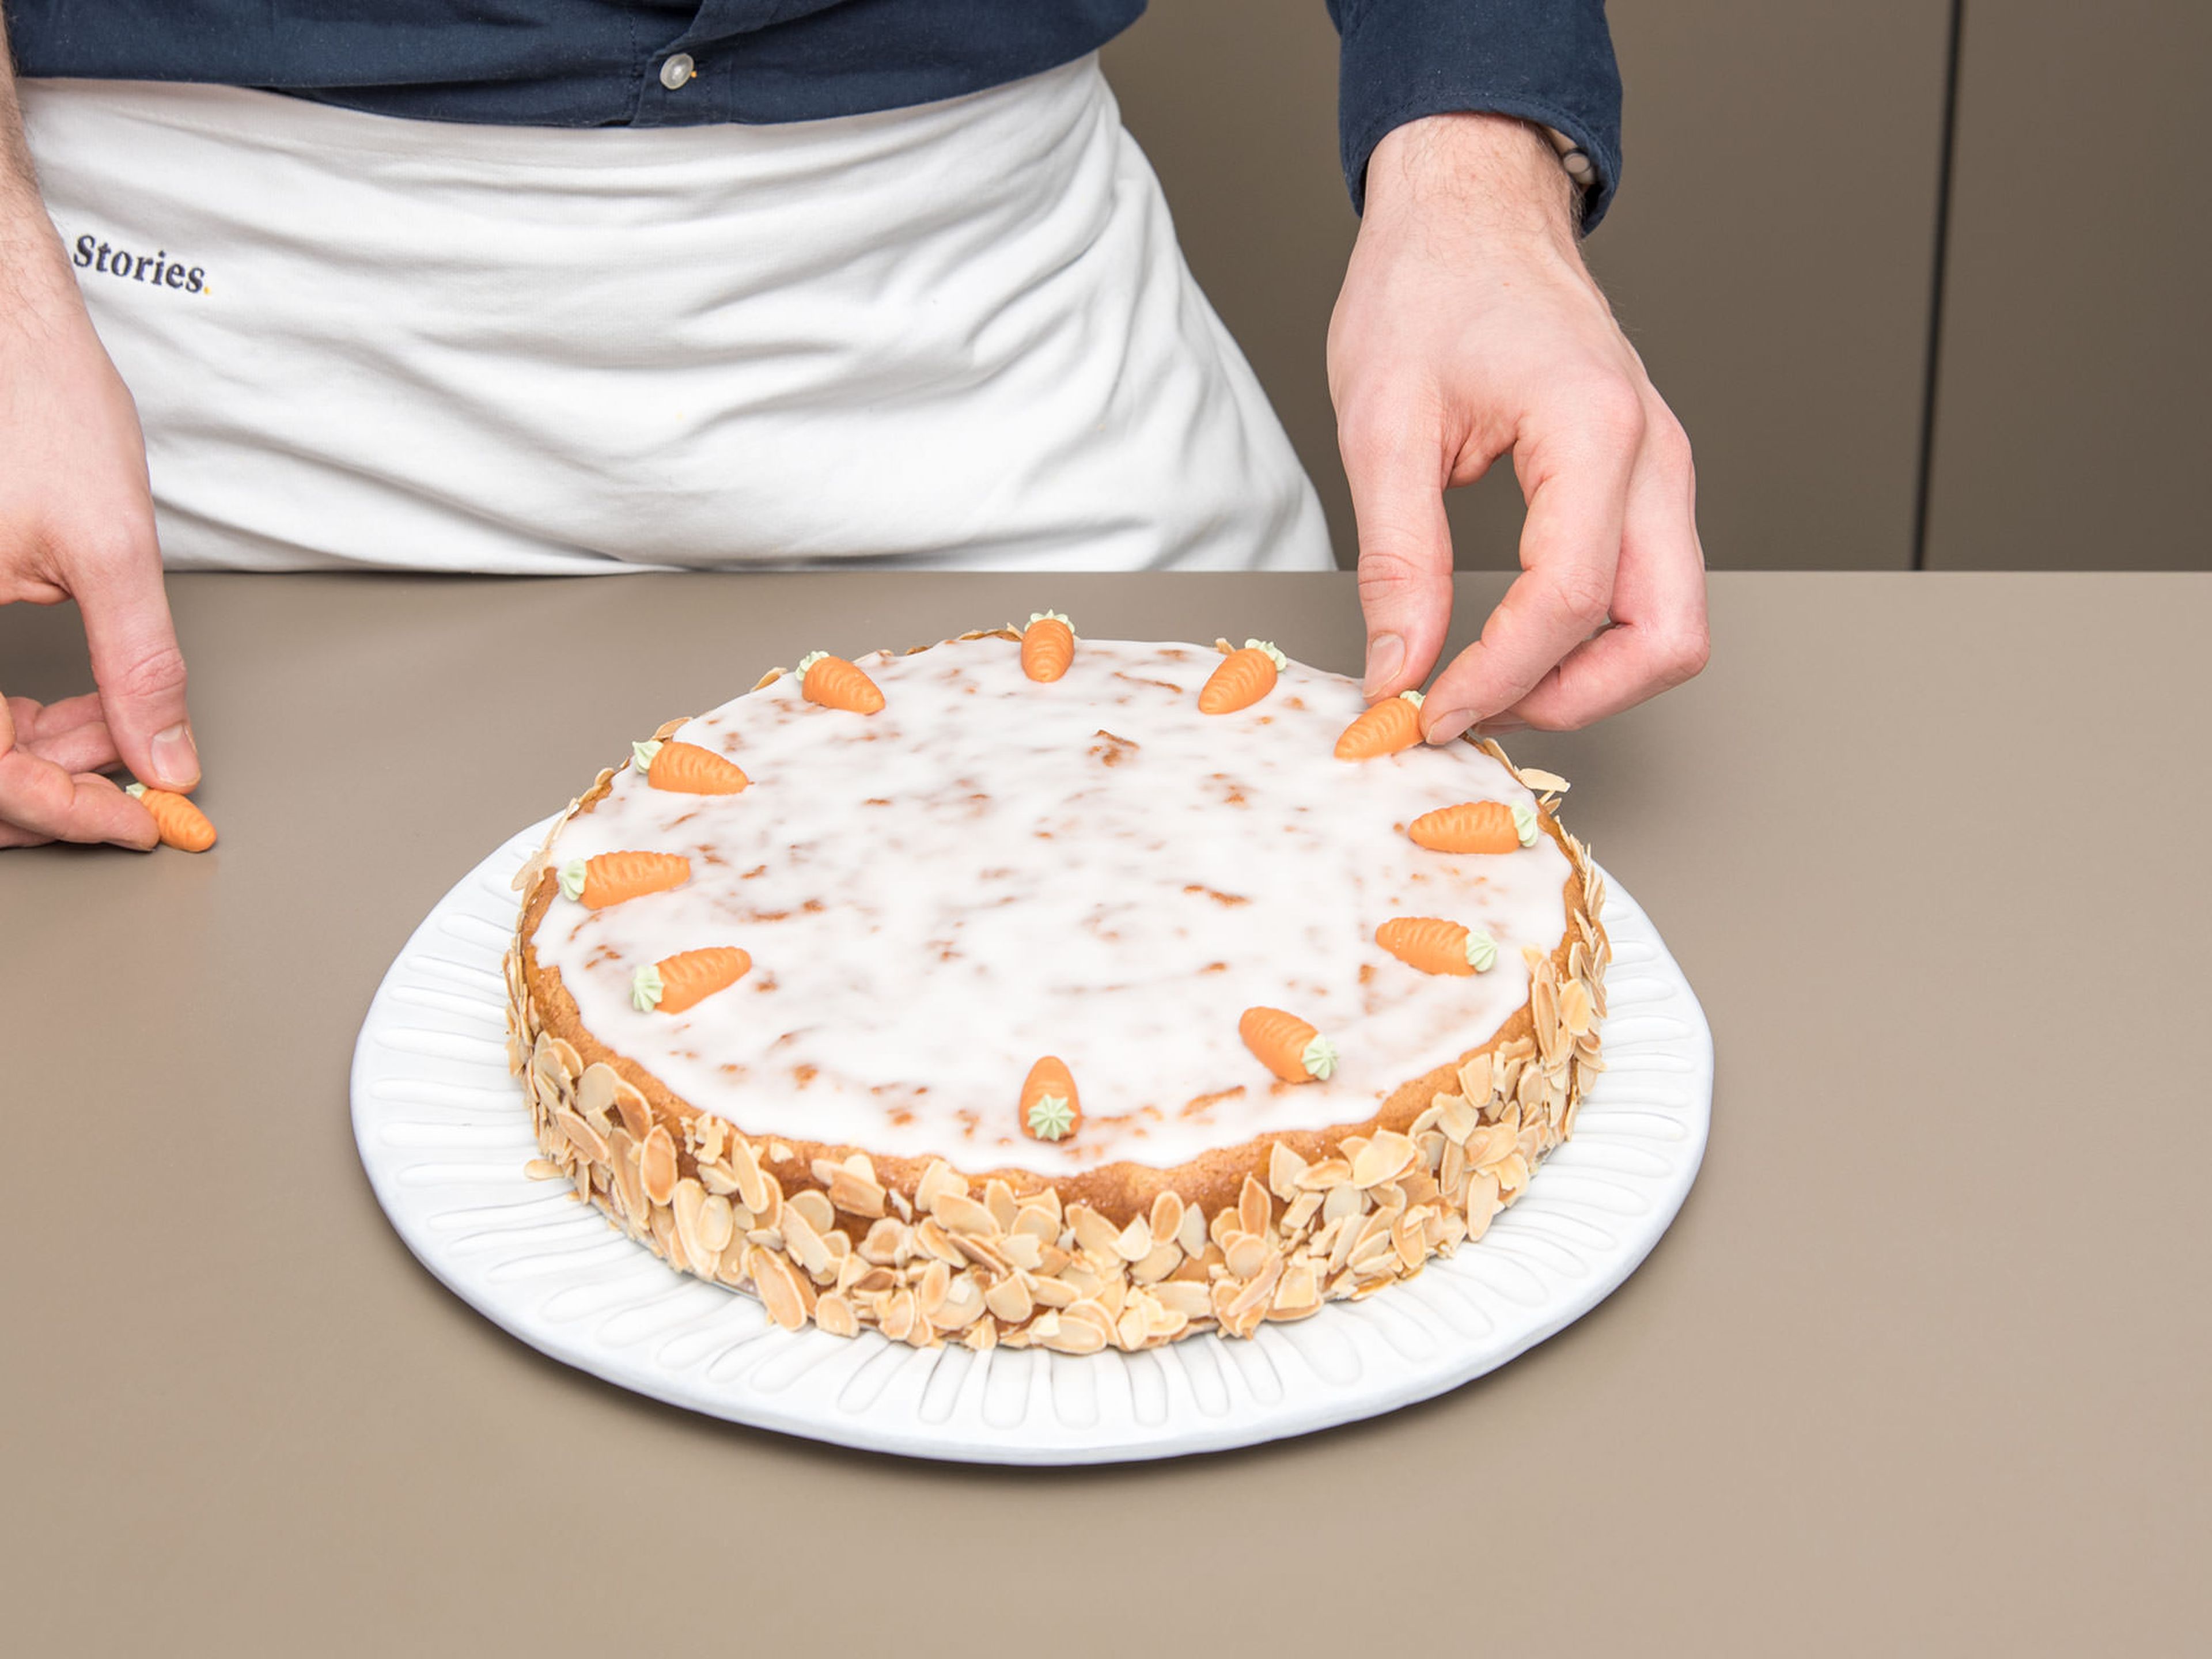 Sieve confectioner’s sugar into a small bowl, and add water to make a thick icing. With a palette knife coat cake with apricot jam and evenly brush with icing. Decorate sides with roasted almond slices and the top with marzipan carrots. Enjoy!